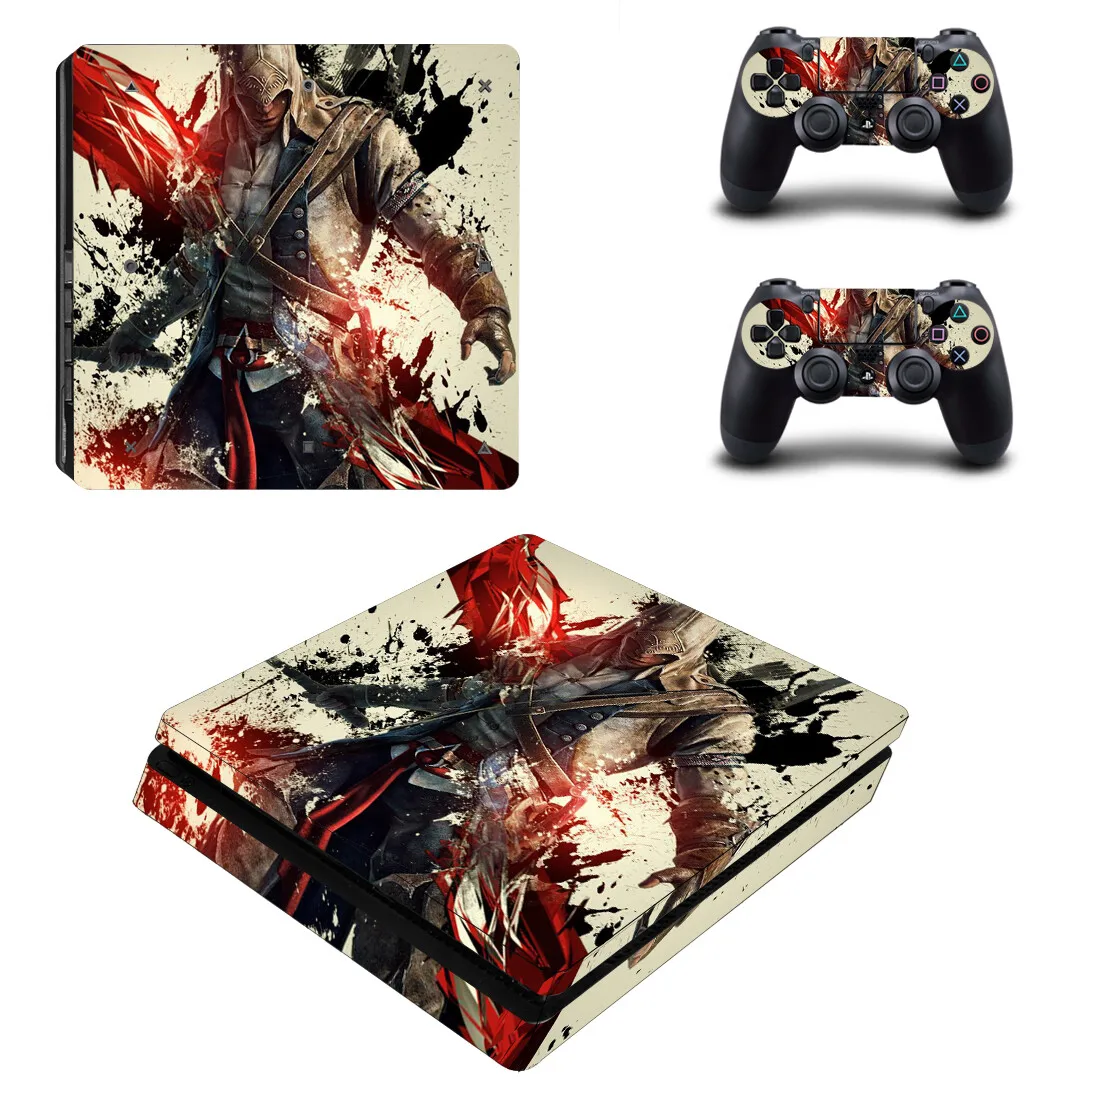 

New Game PS4 Slim Stickers Play station 4 Skin Sticker Decal Cover For PlayStation 4 PS4 Slim Consol & Controller Skins